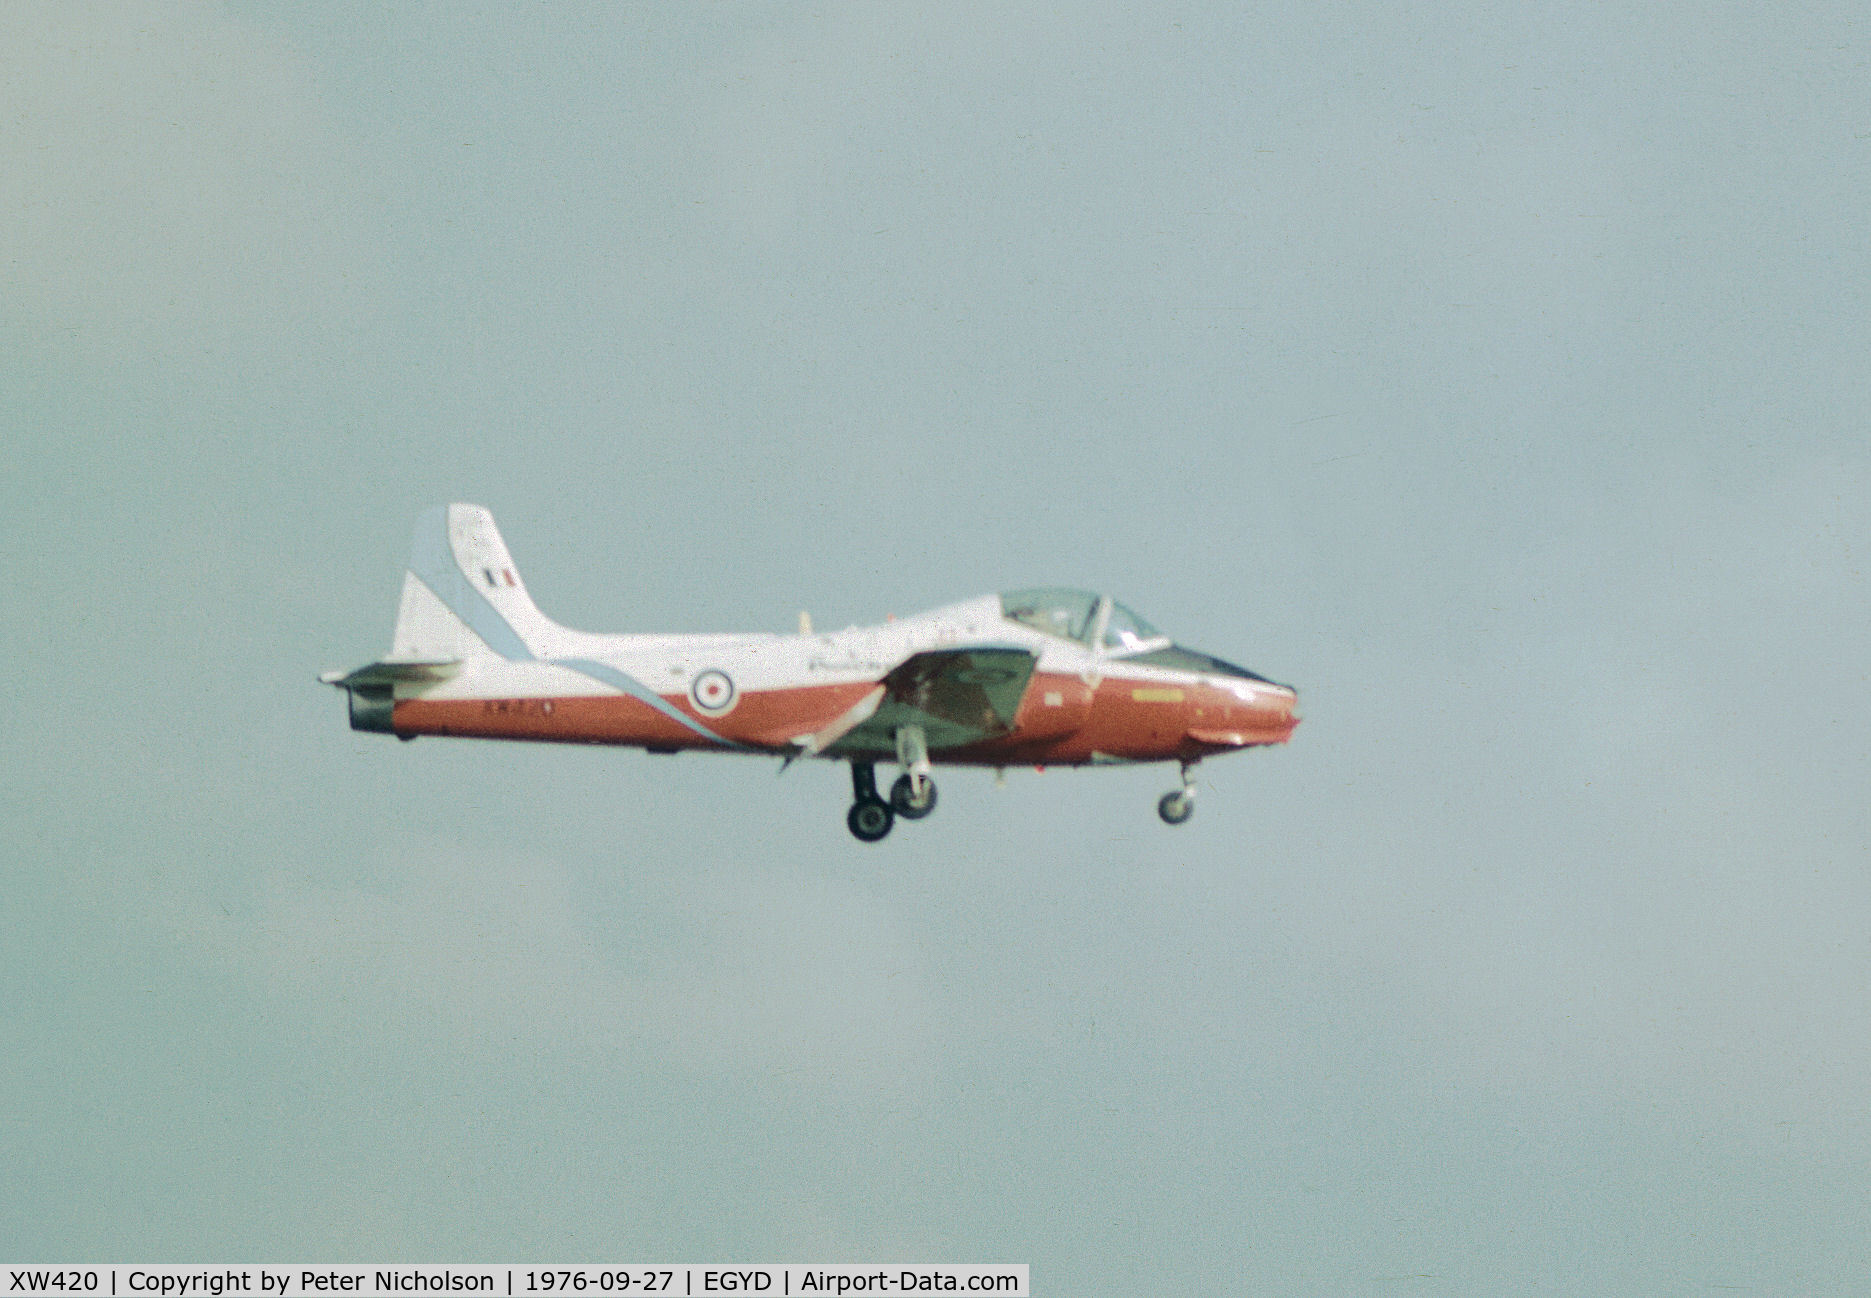 XW420, 1971 BAC 84 Jet Provost T.5A C/N EEP/JP/1042, Jet Provost T.5A of the RAF College's Poachers aerobatic display team returning to RAF Cranwell in September 1976.